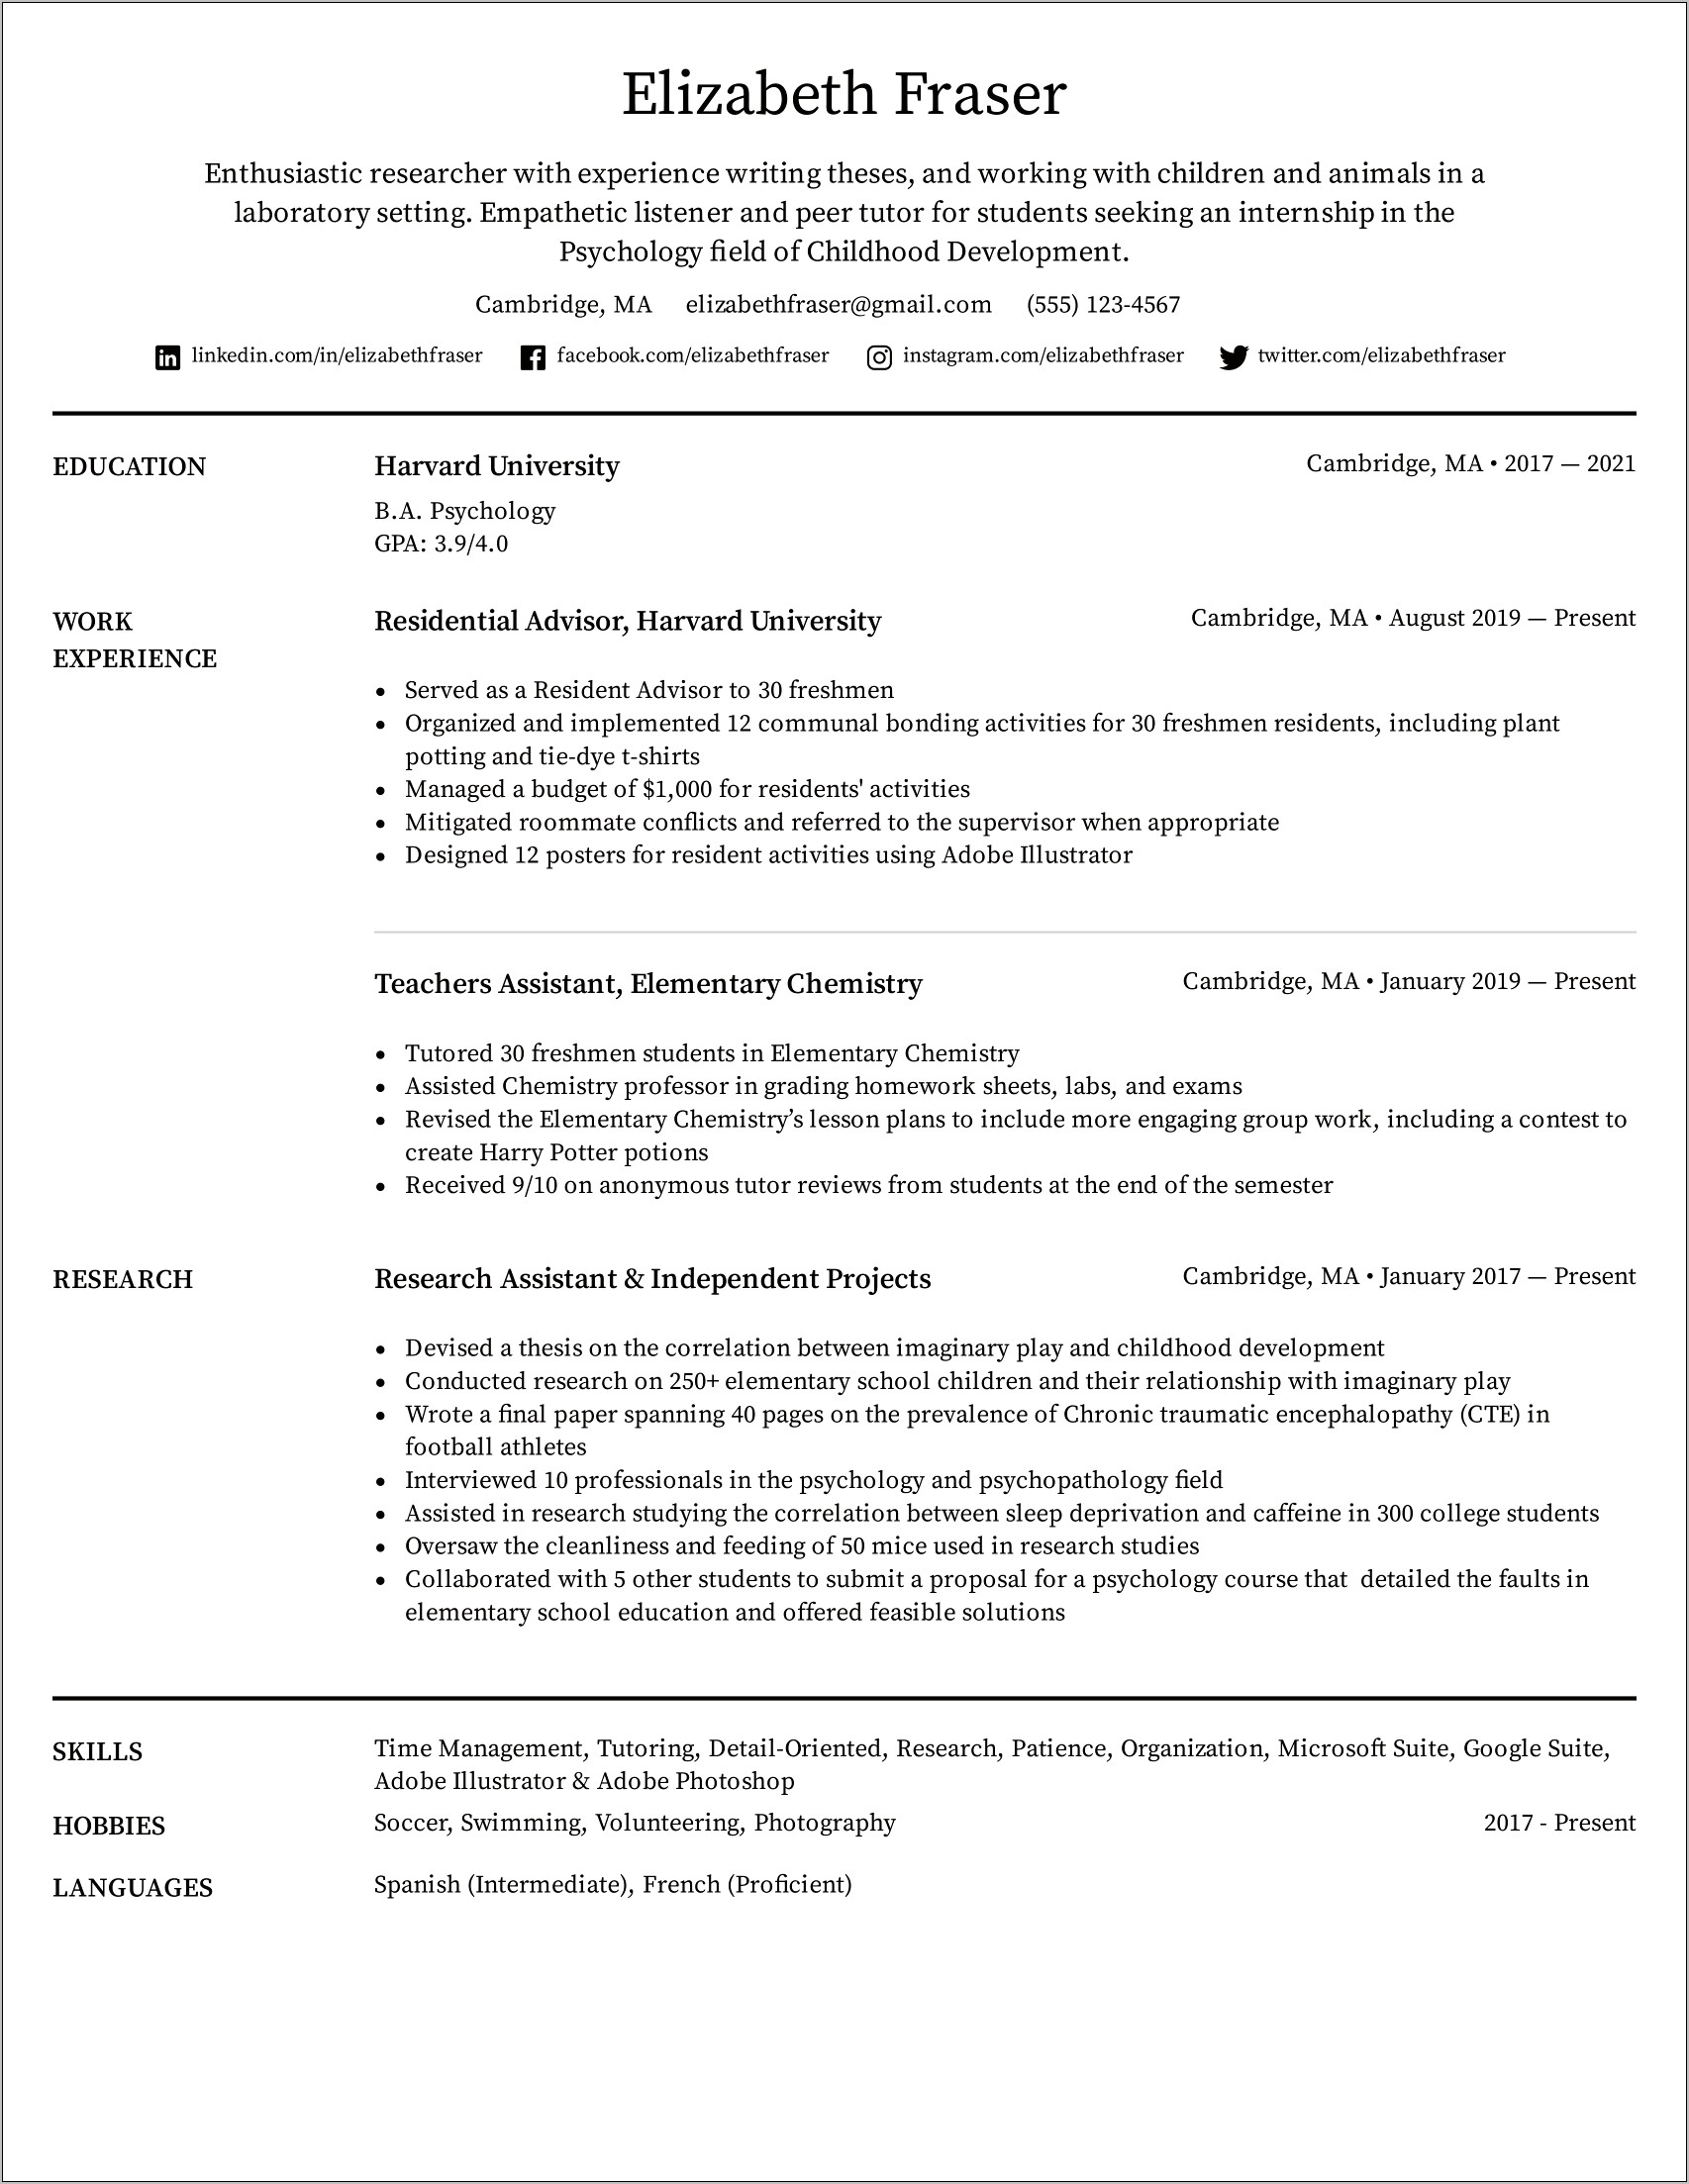 Resume Skill Section For College Student